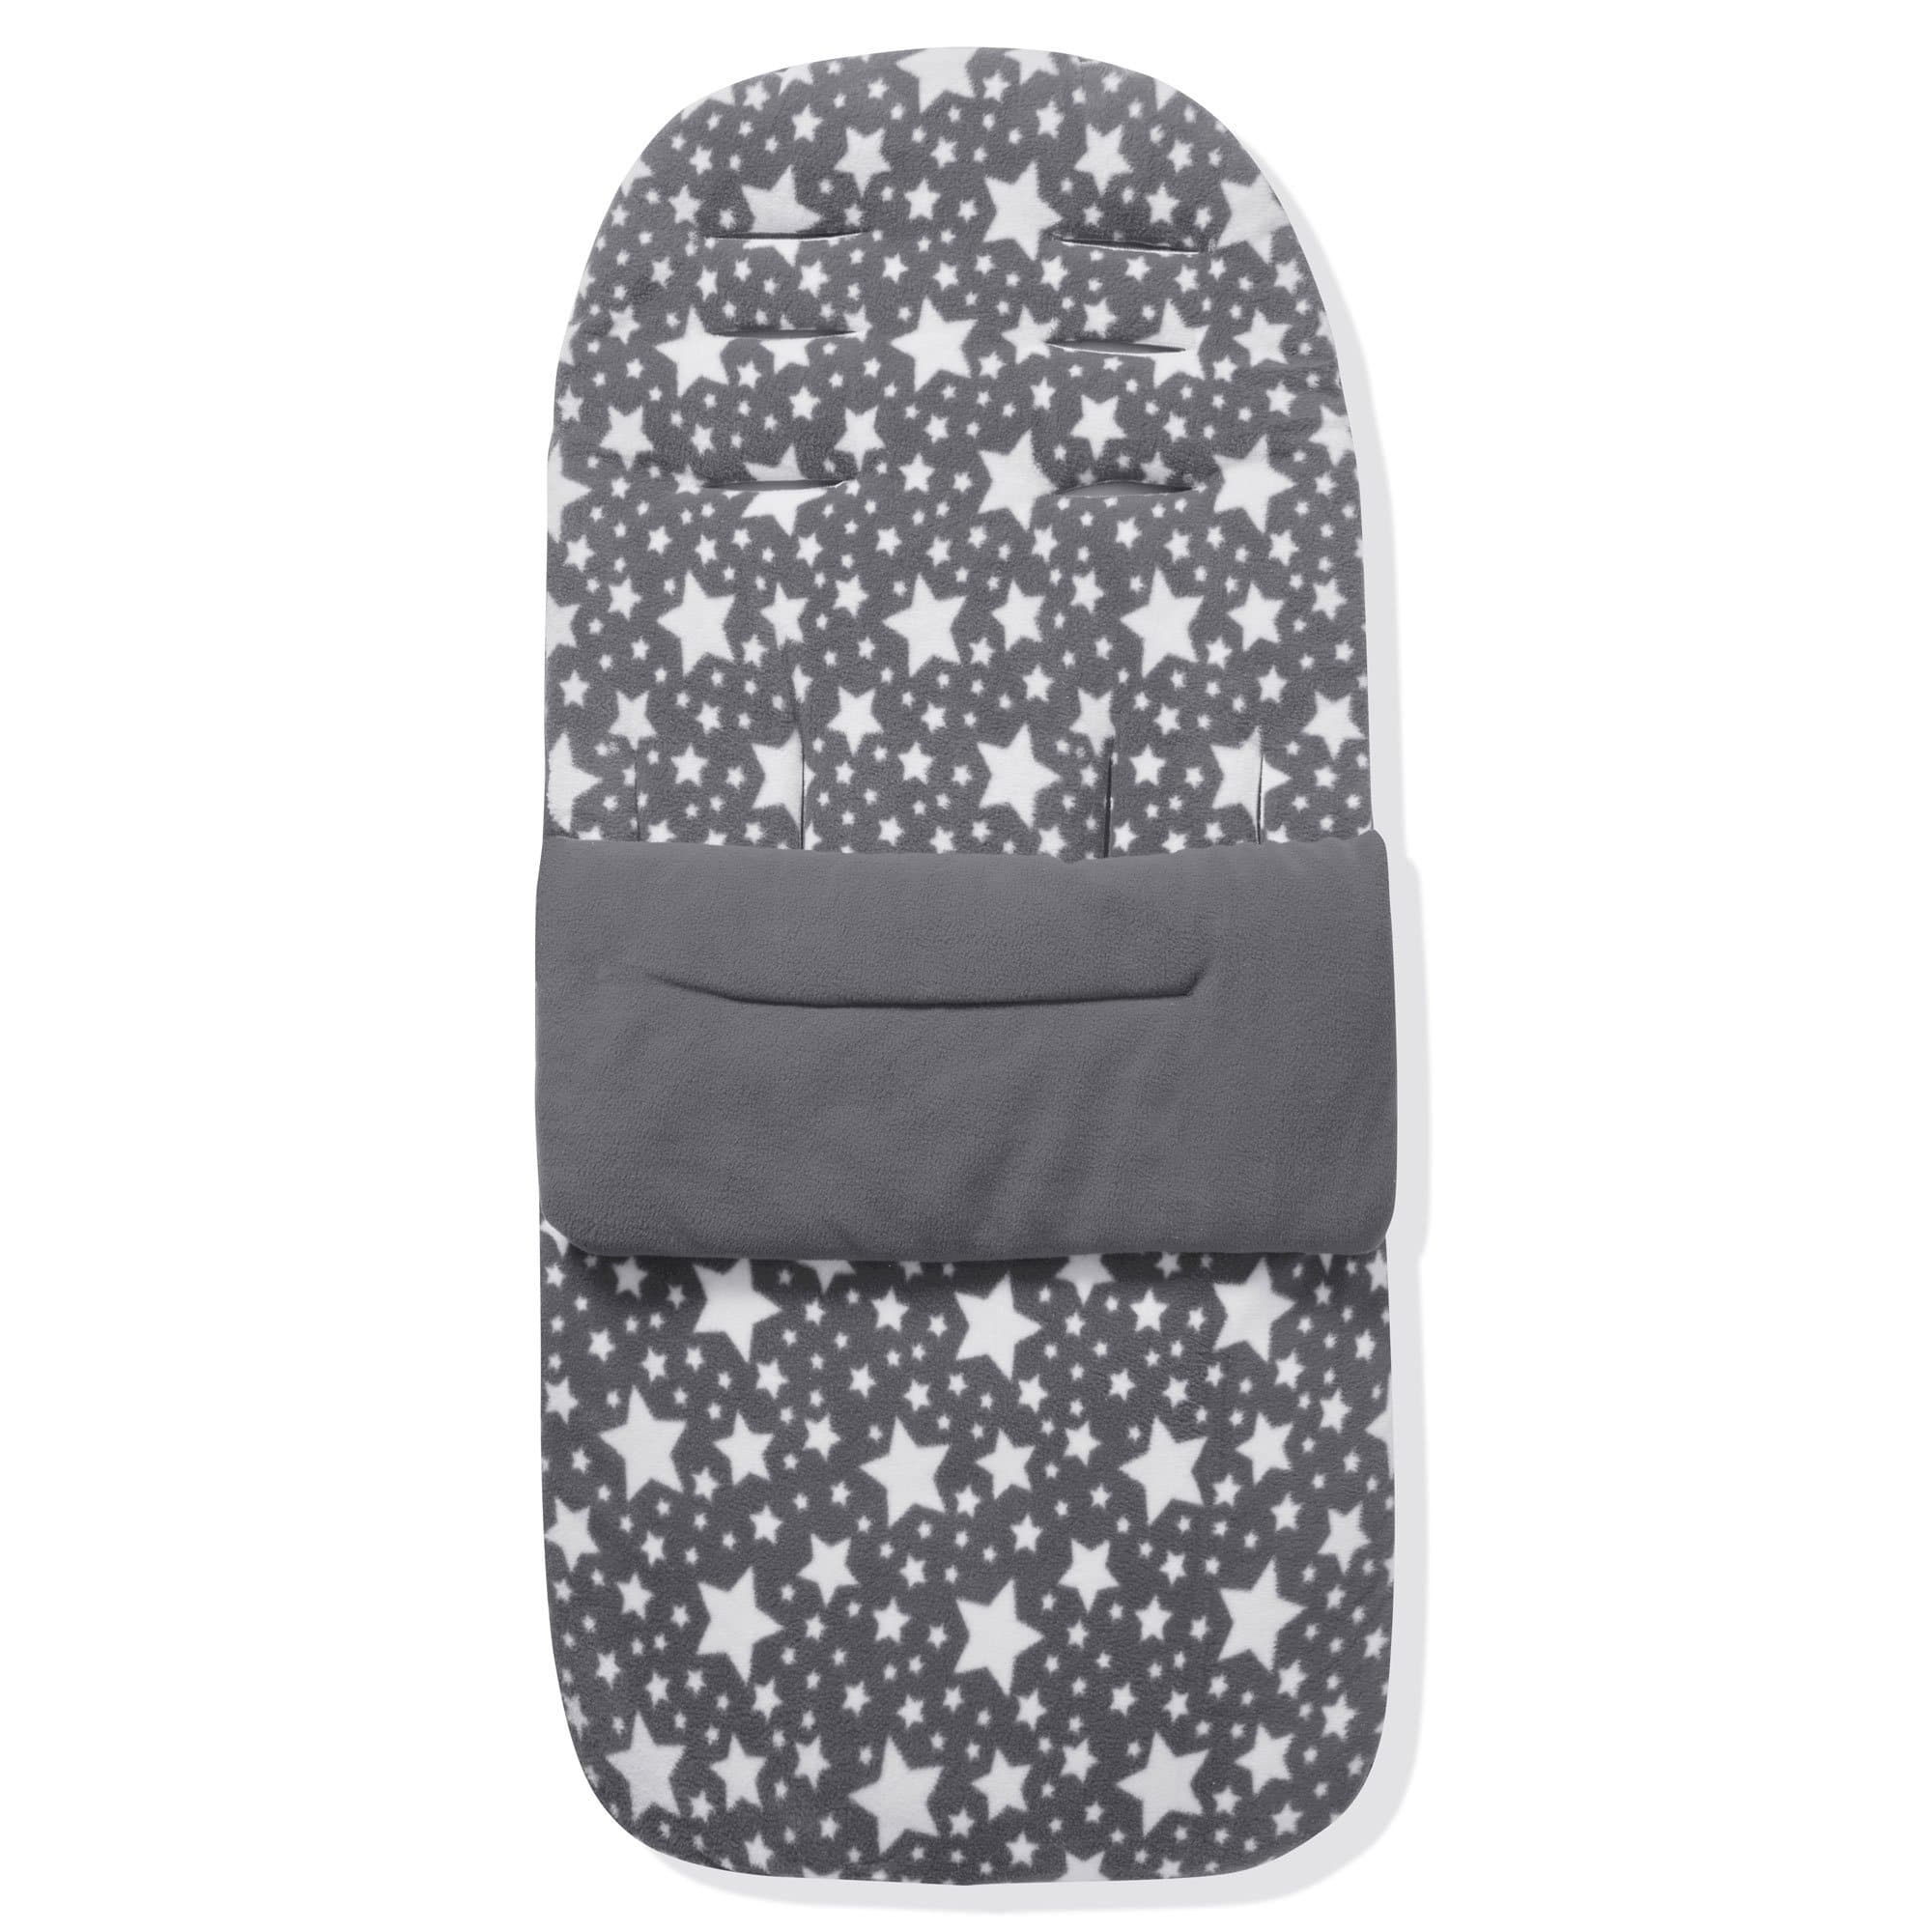 Fleece Footmuff / Cosy Toes Compatible with Hauck - Grey Star / Fits All Models | For Your Little One